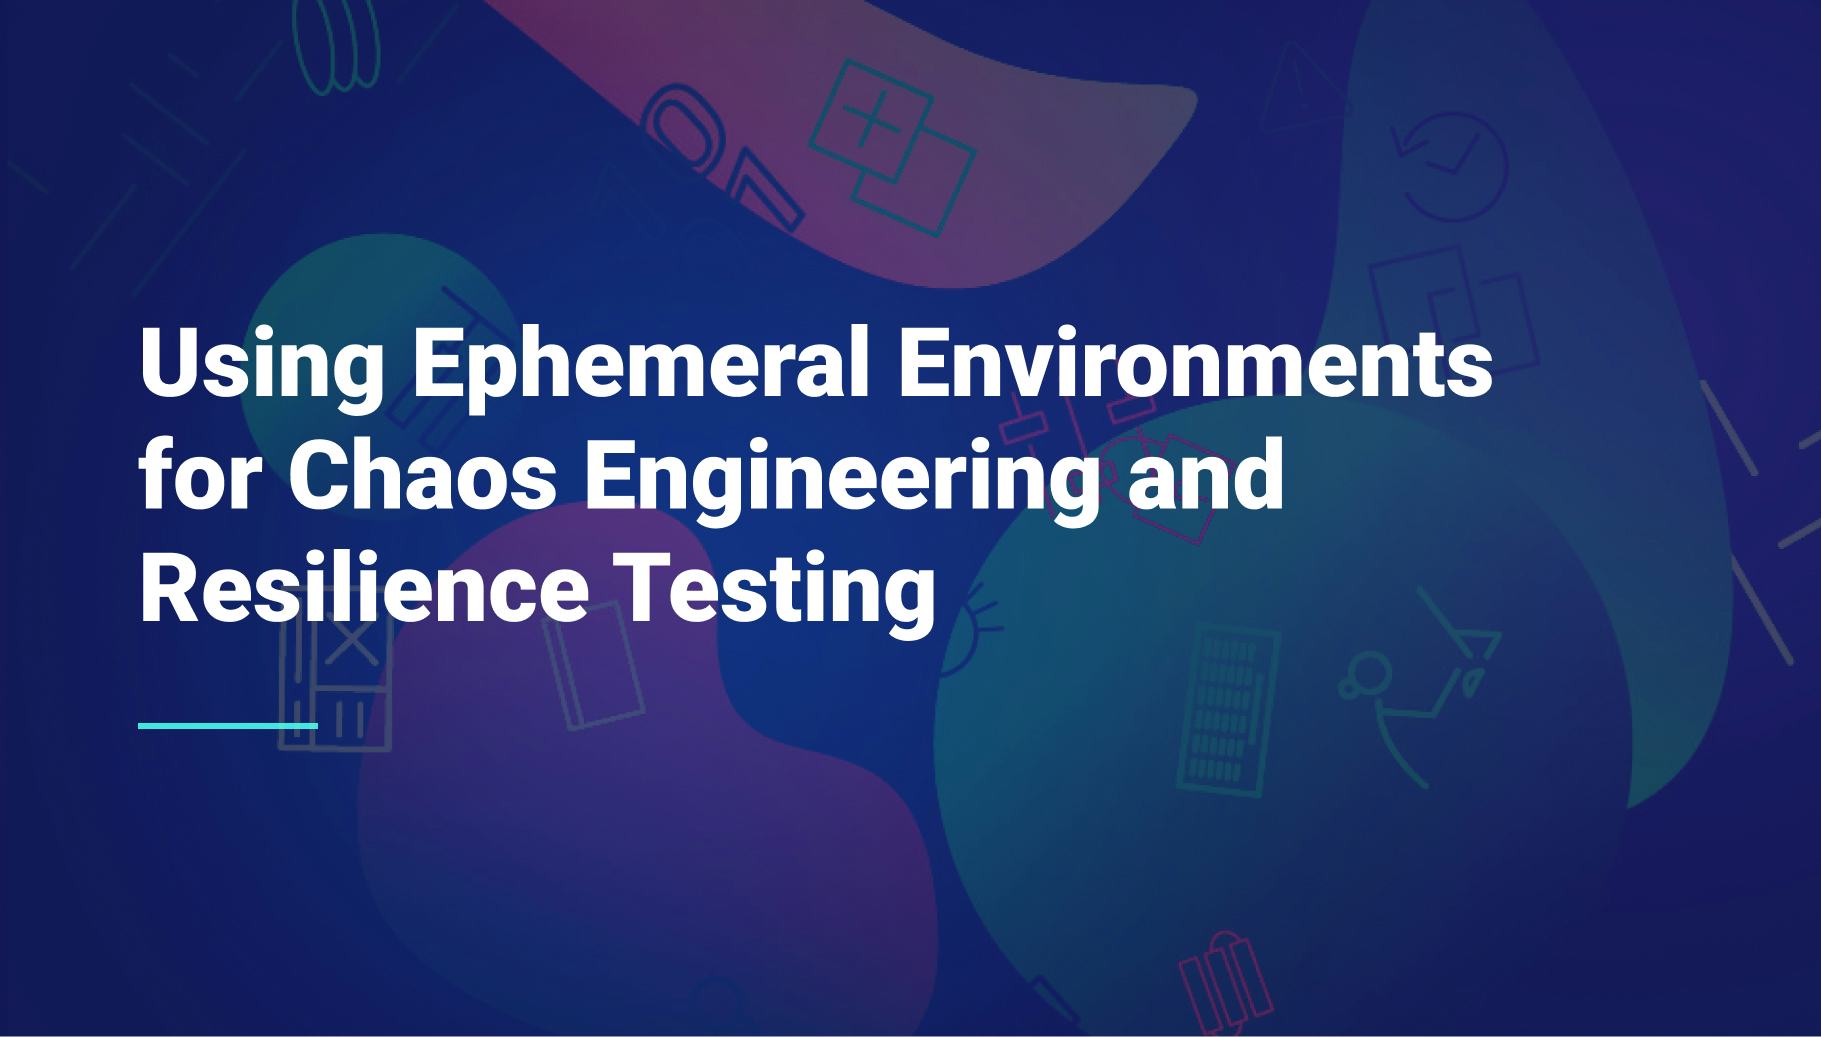 Using Ephemeral Environments for Chaos Engineering and Resilience Testing - Qovery